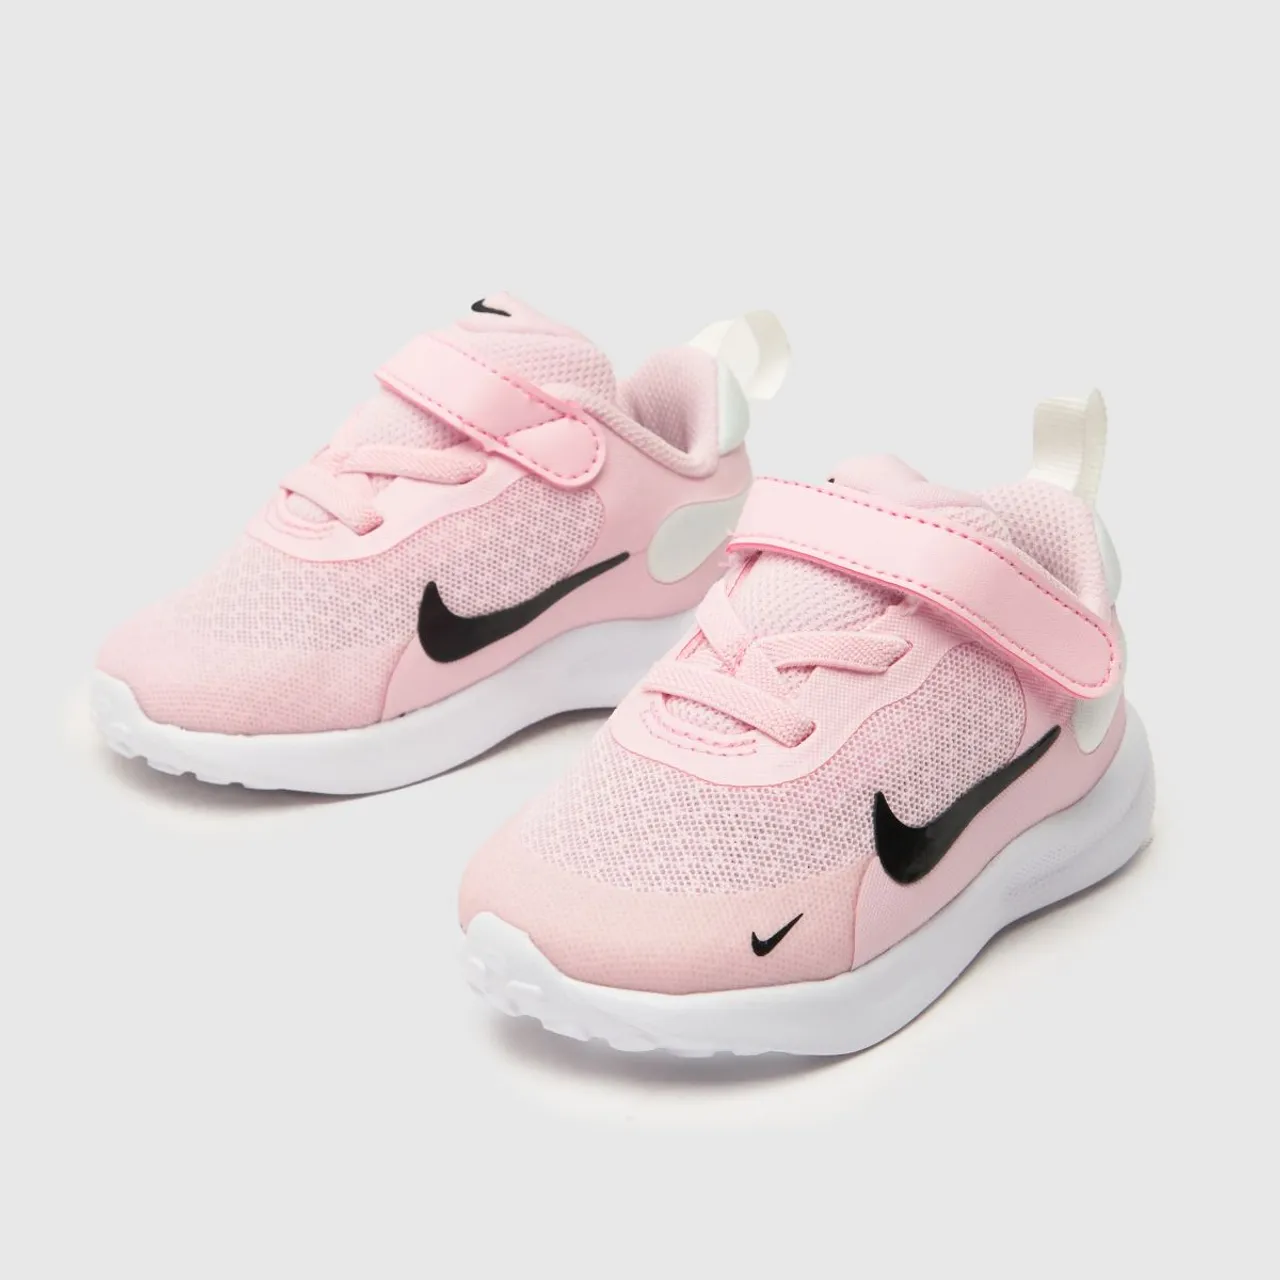 Nike Pale Pink Revolution 7 Girls Toddler Trainers